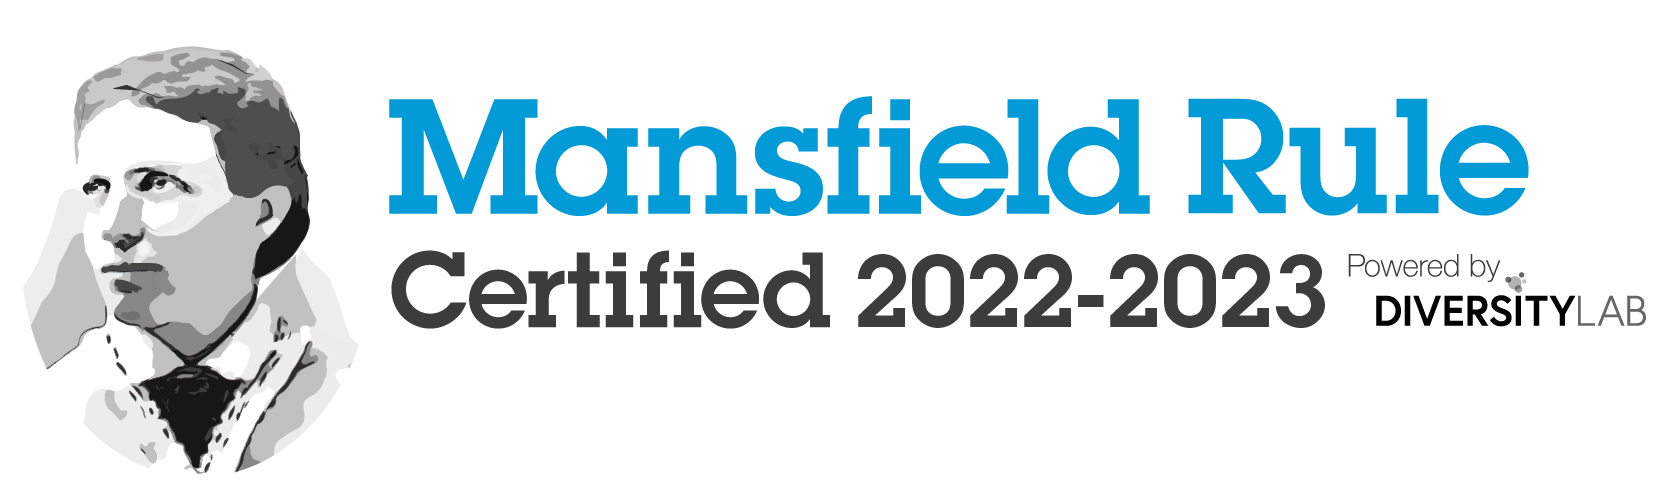 Mansfield Certification Badge for 2022